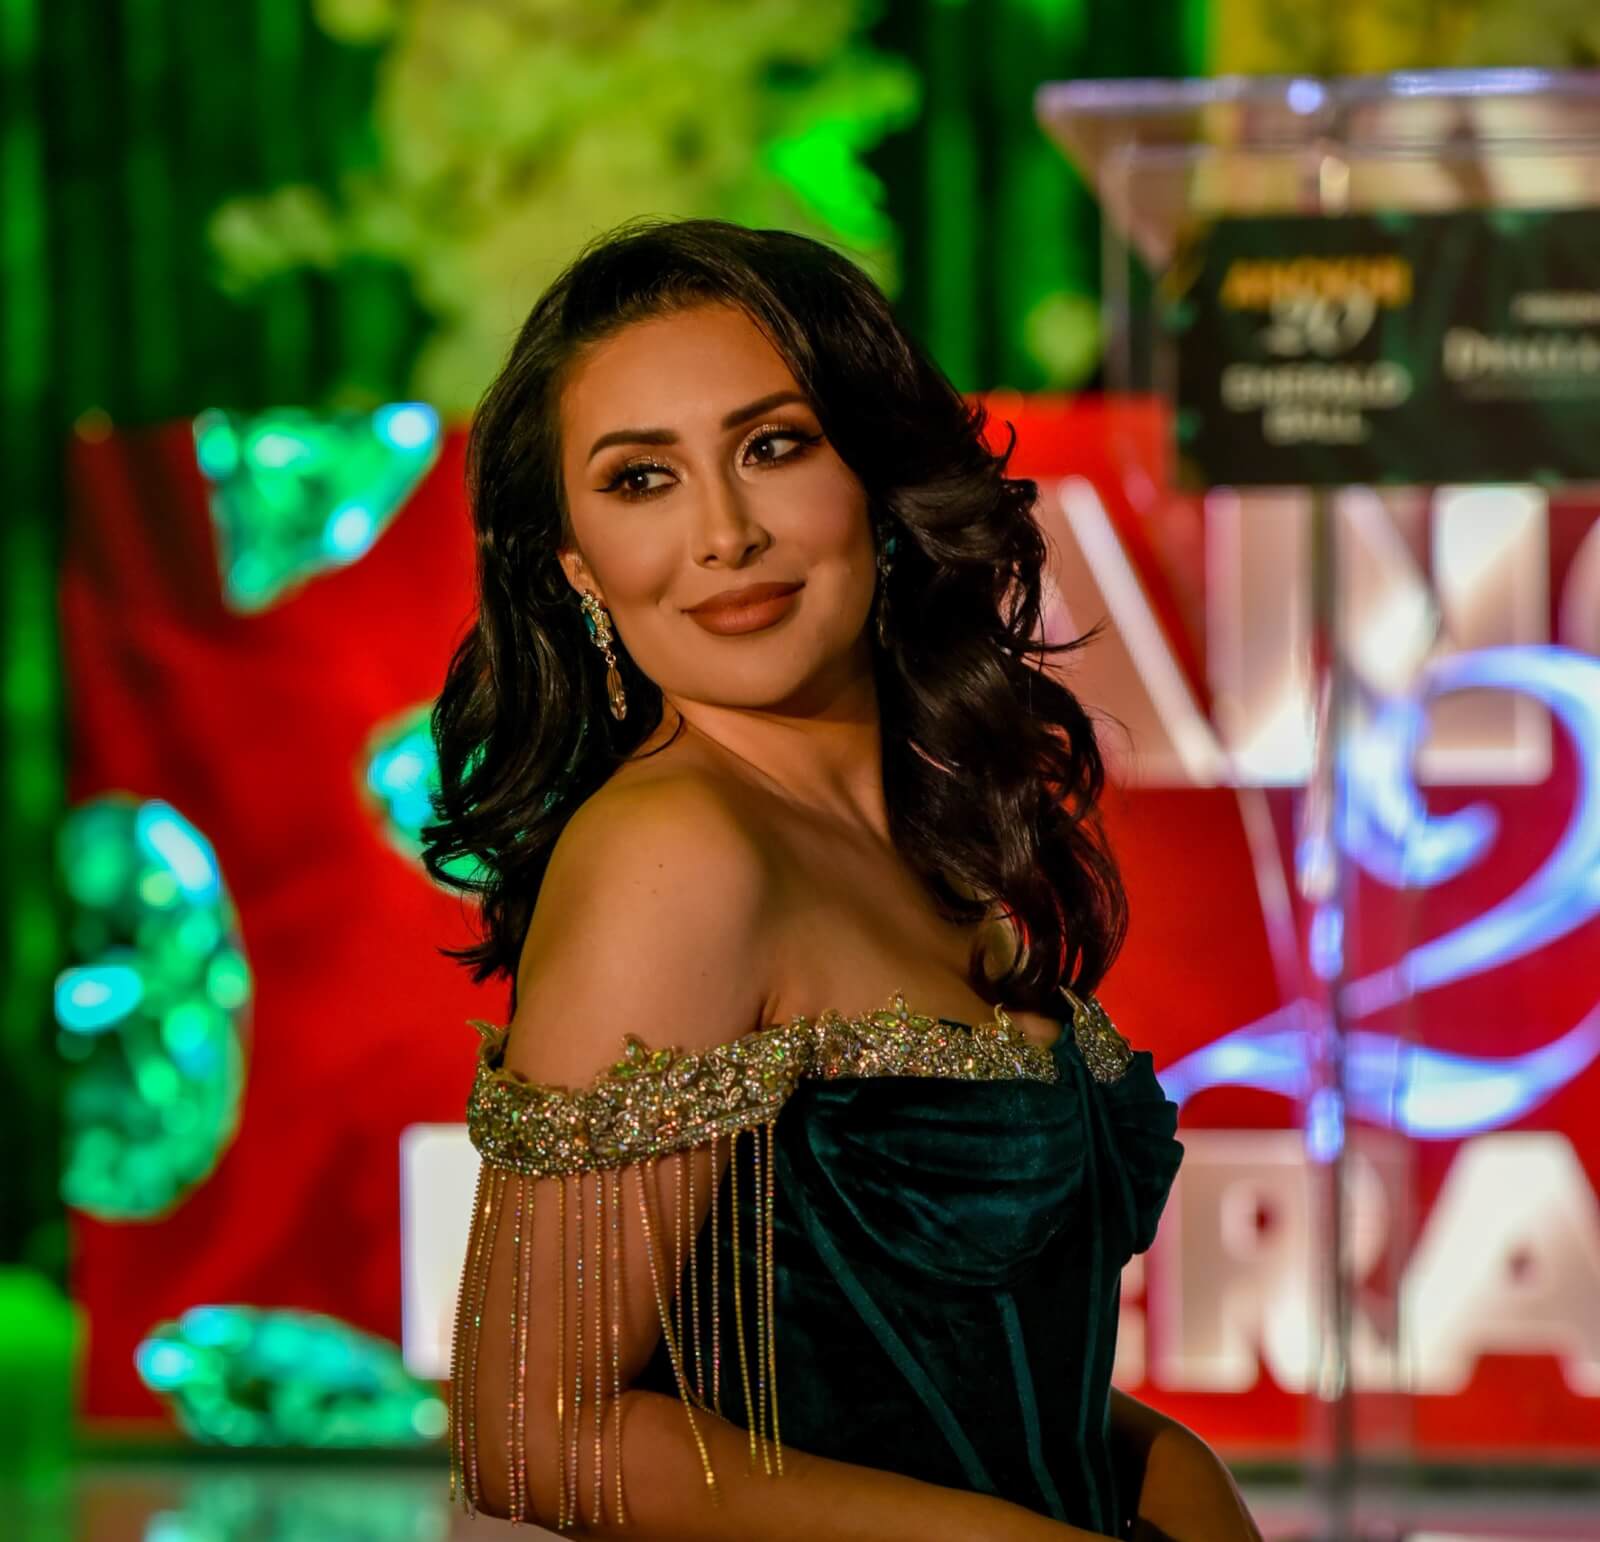 #ANOKHI20: Our Fave Beauty Looks From ANOKHI's 20th Anniversary ANOKHI Emerald Event Series: Natasha Chanel from The ANOKHI EMERALD BALL. Photo Credits listed below.